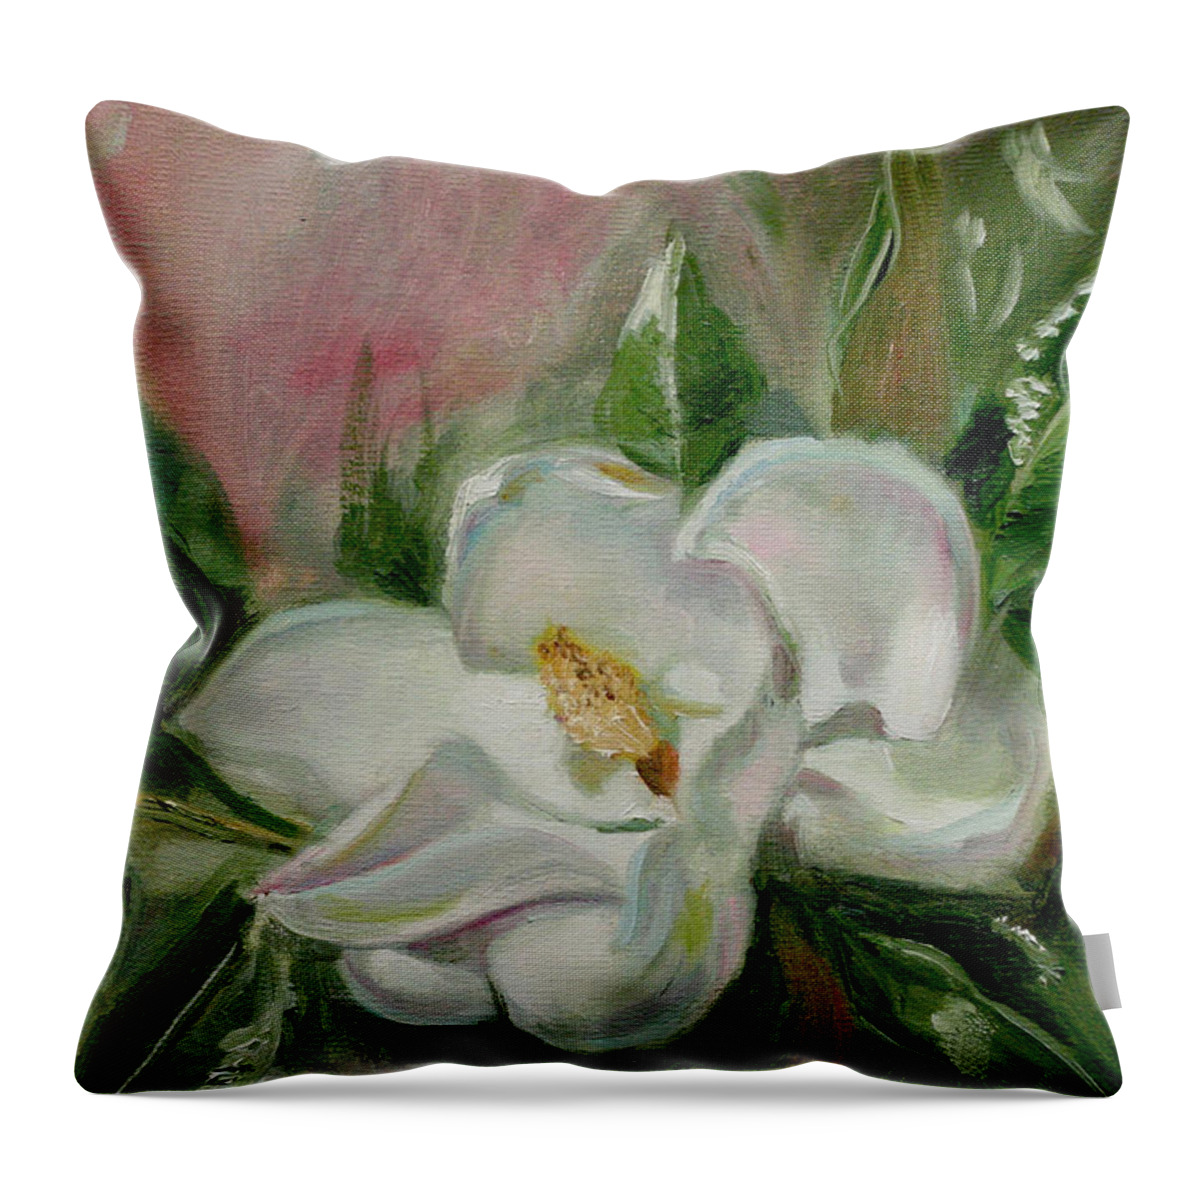 Still Life Throw Pillow featuring the painting Magnolia Blossom by Sarah Parks